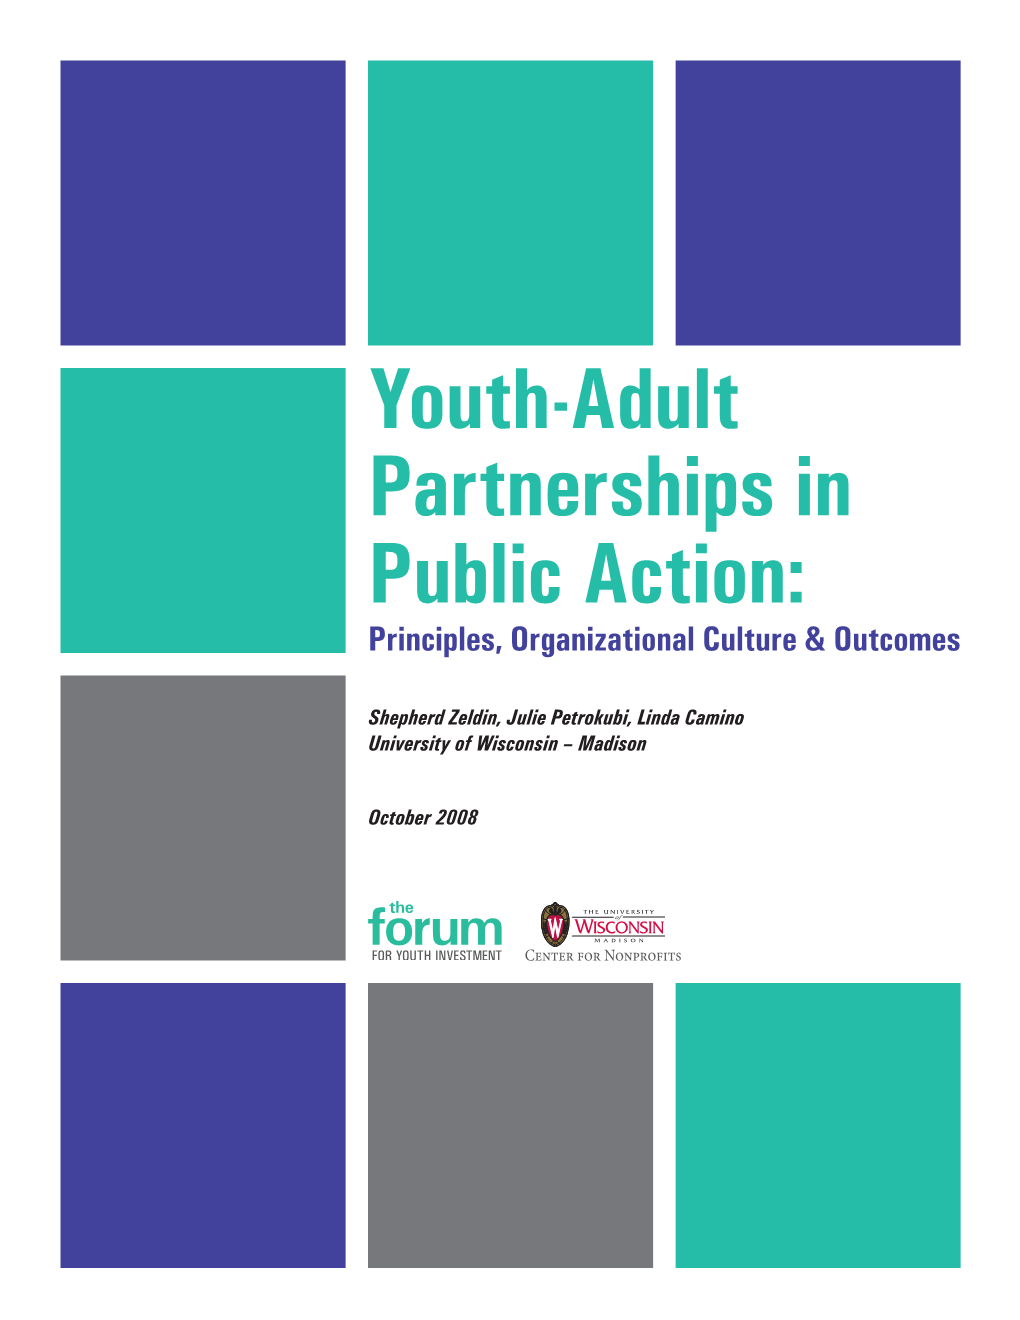 Youth-Adult Partnerships in Public Action: Principles, Organizational Culture & Outcomes